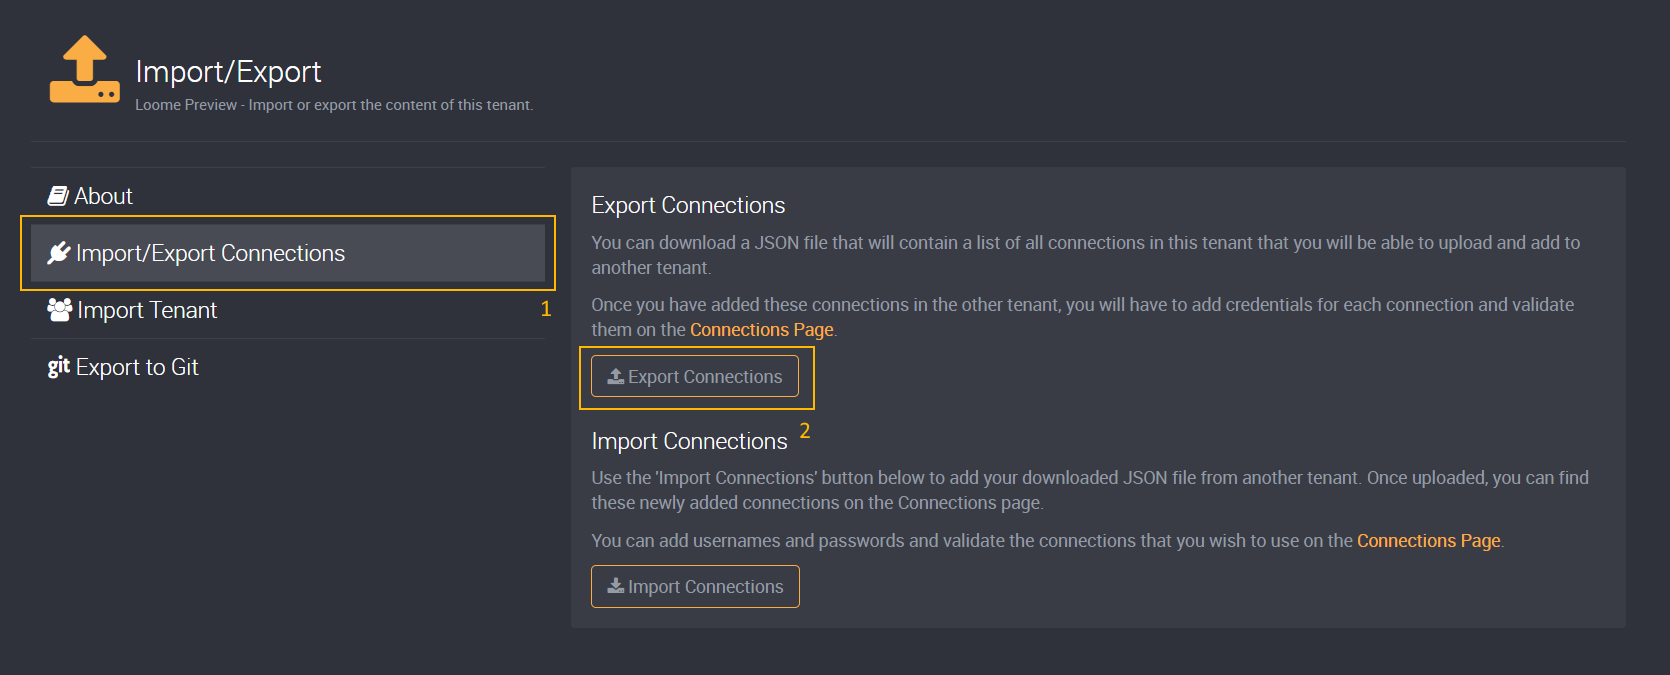 Export connections